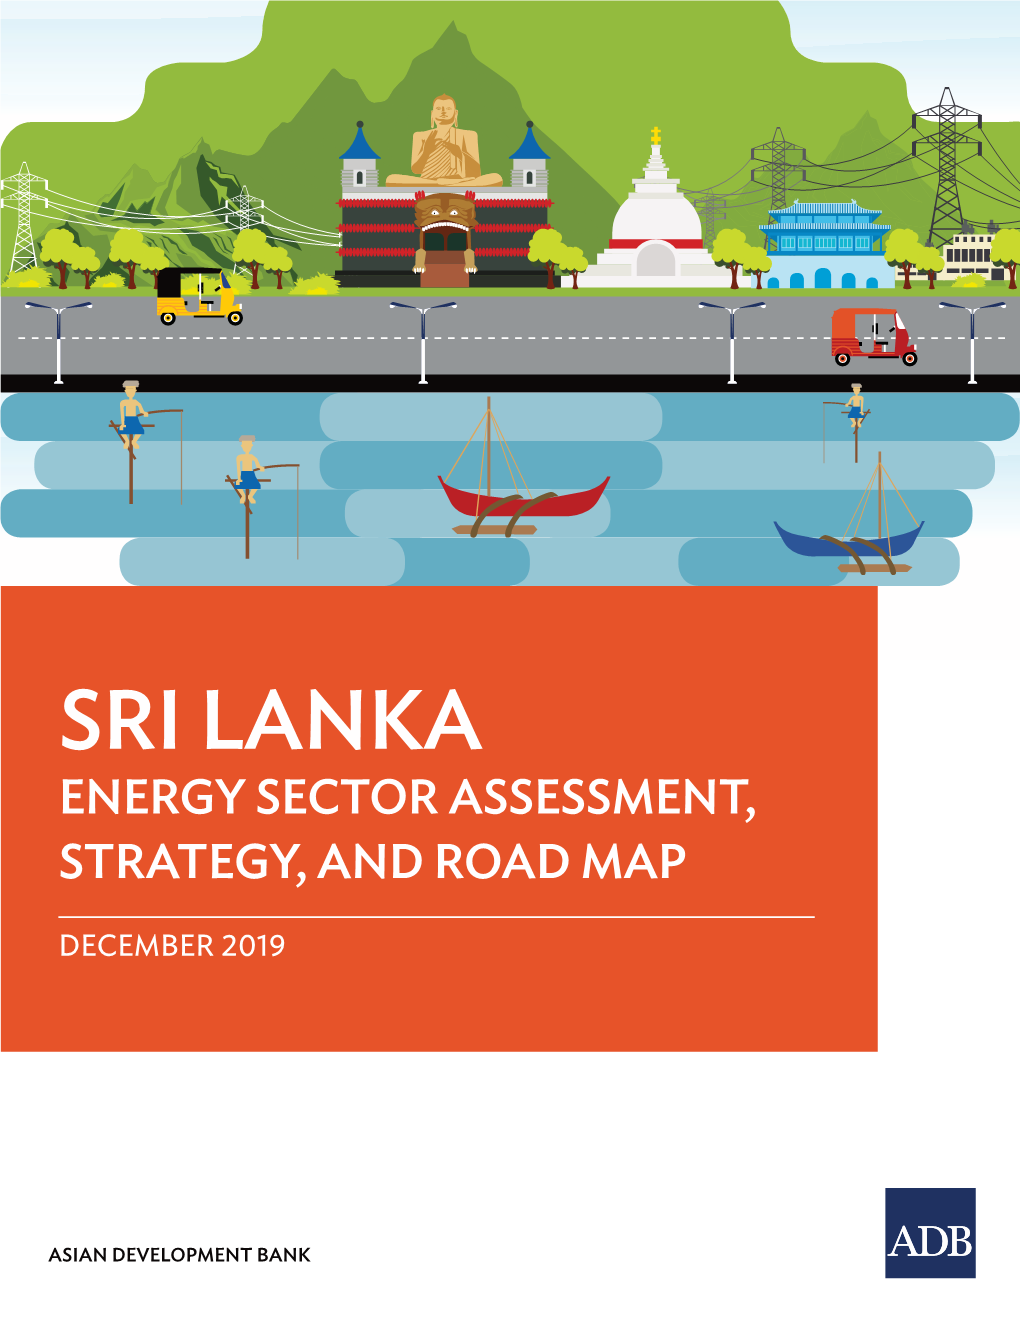 Sri Lanka: Energy Sector Assessment, Strategy, and Road